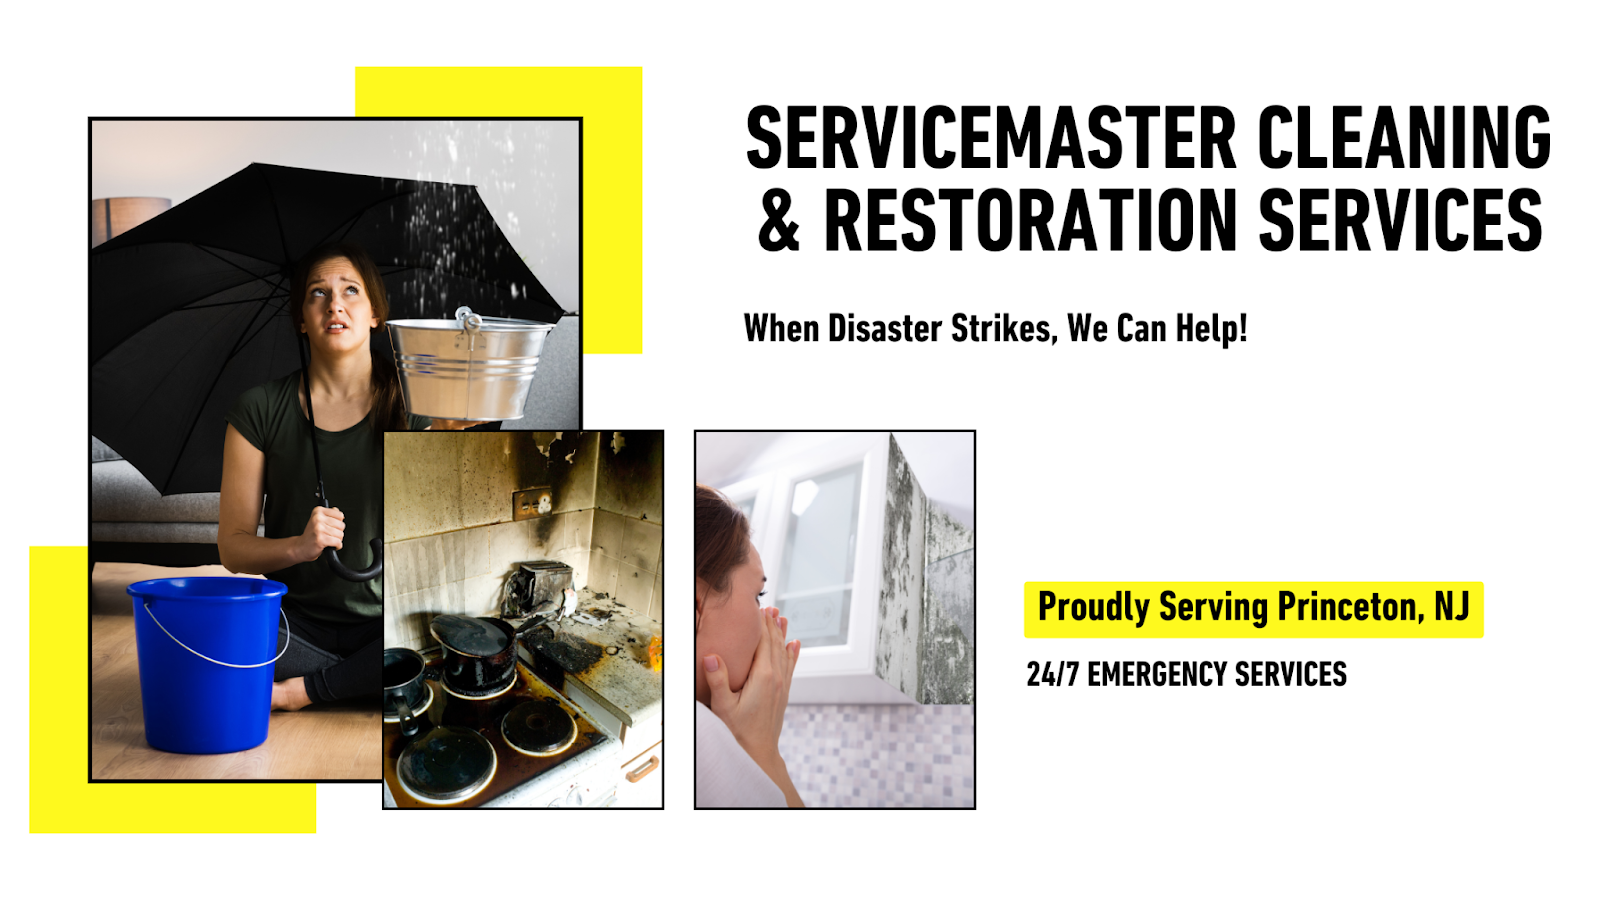 Your Trusted Water Damage Cleanup Team